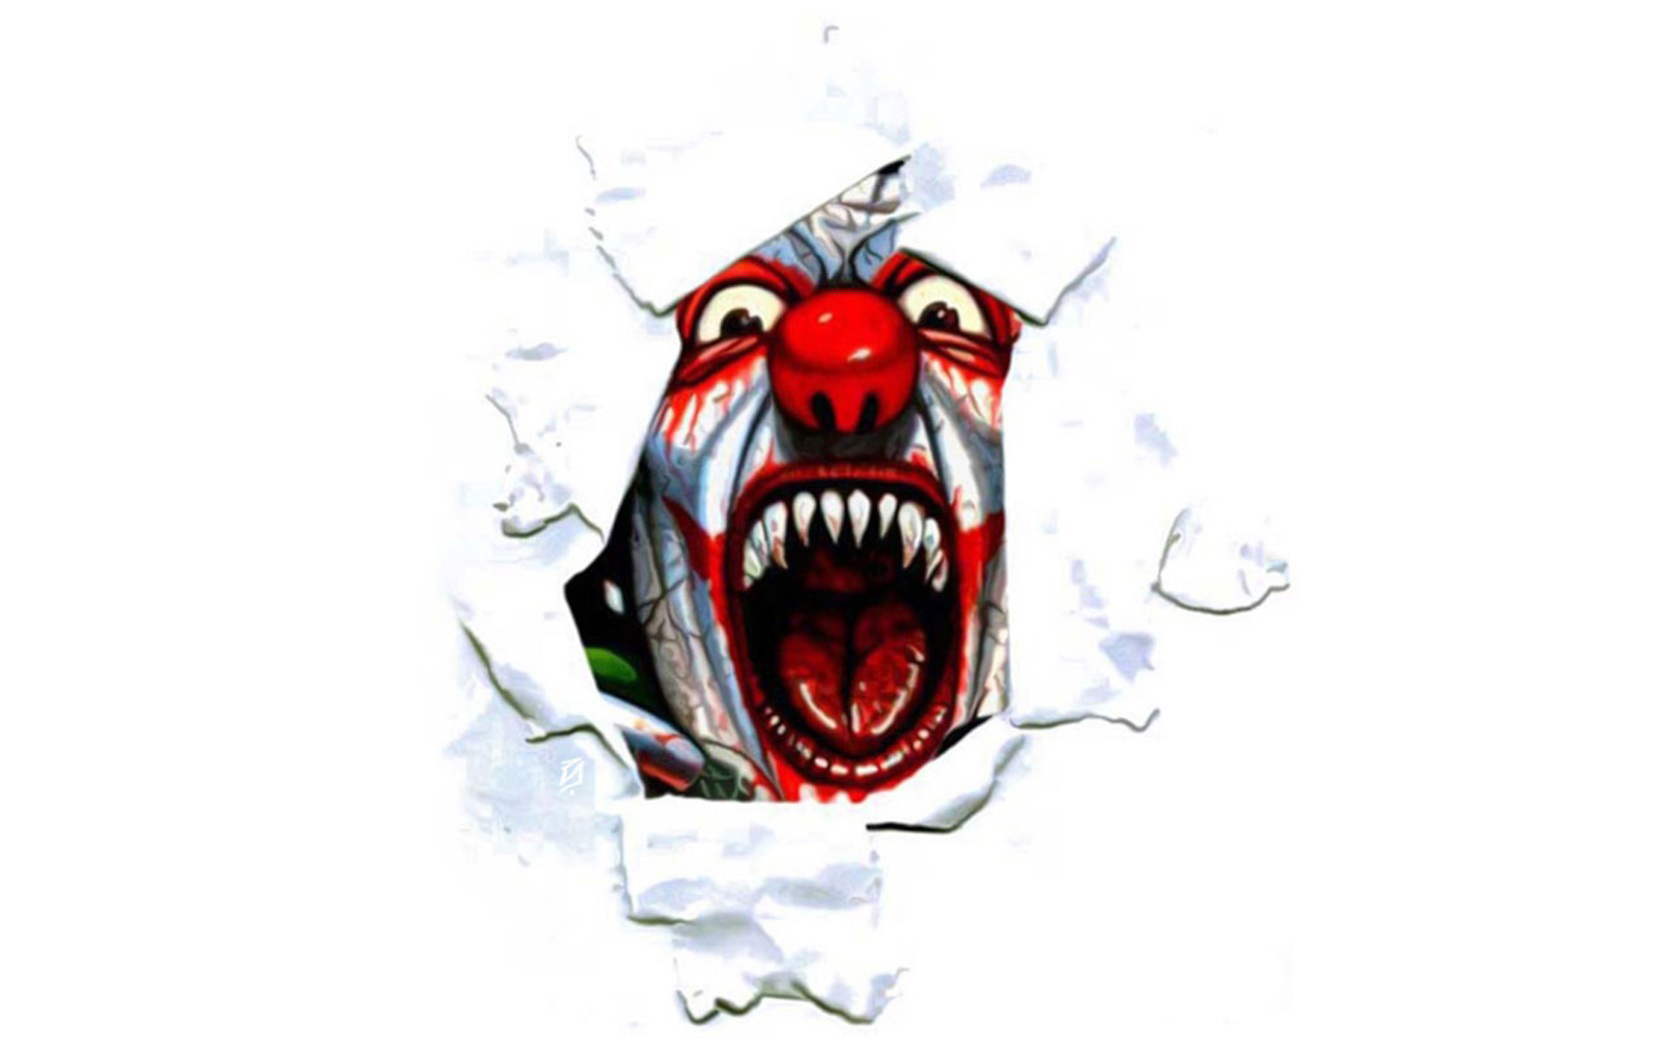 Related Image With Scary Clown Wallpaper